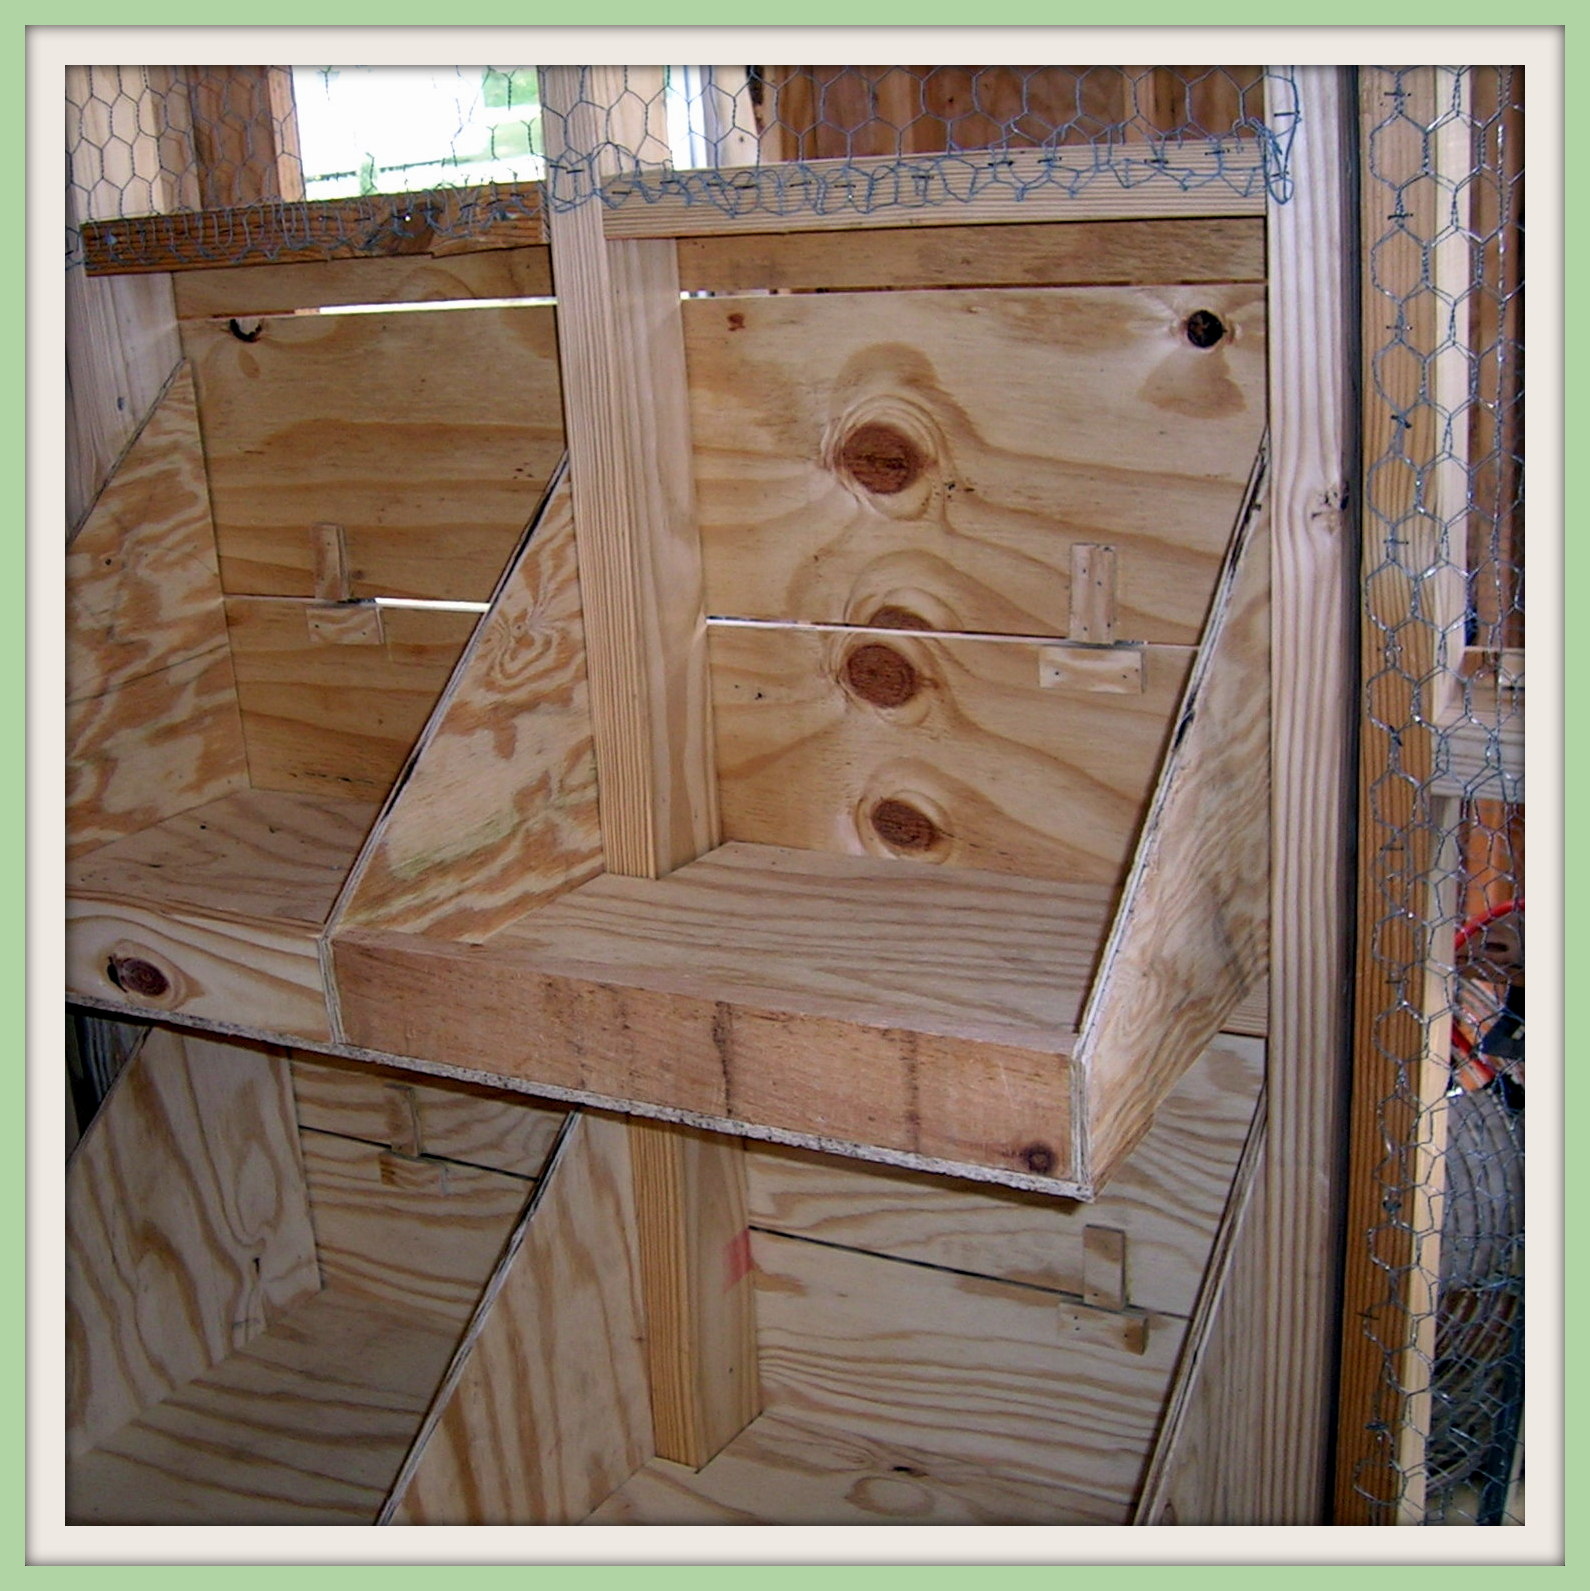 Wit's End Farm: Chicken Coop Nest Boxes